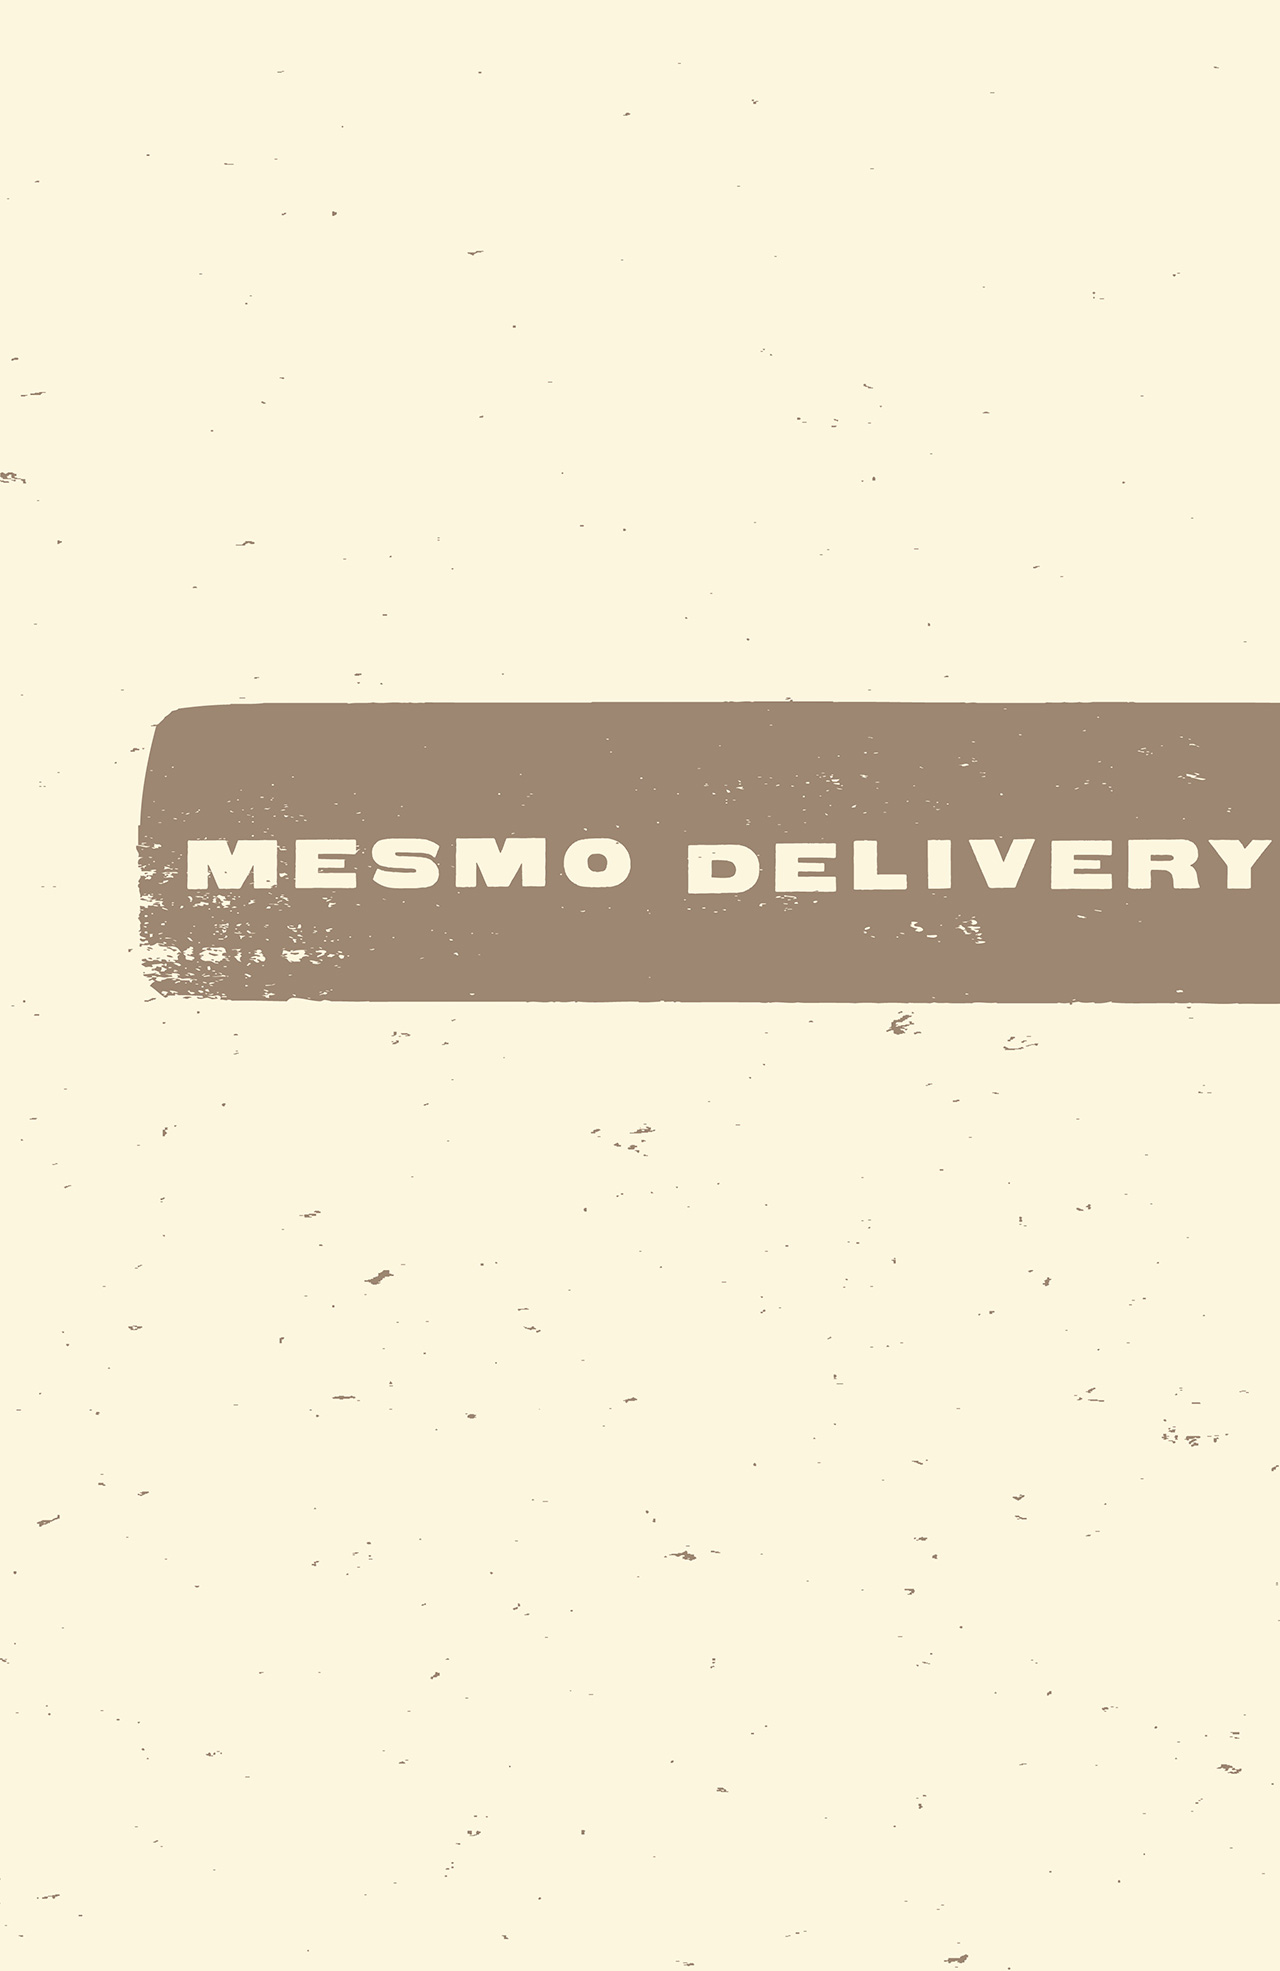 Read online Mesmo Delivery comic -  Issue # TPB - 3